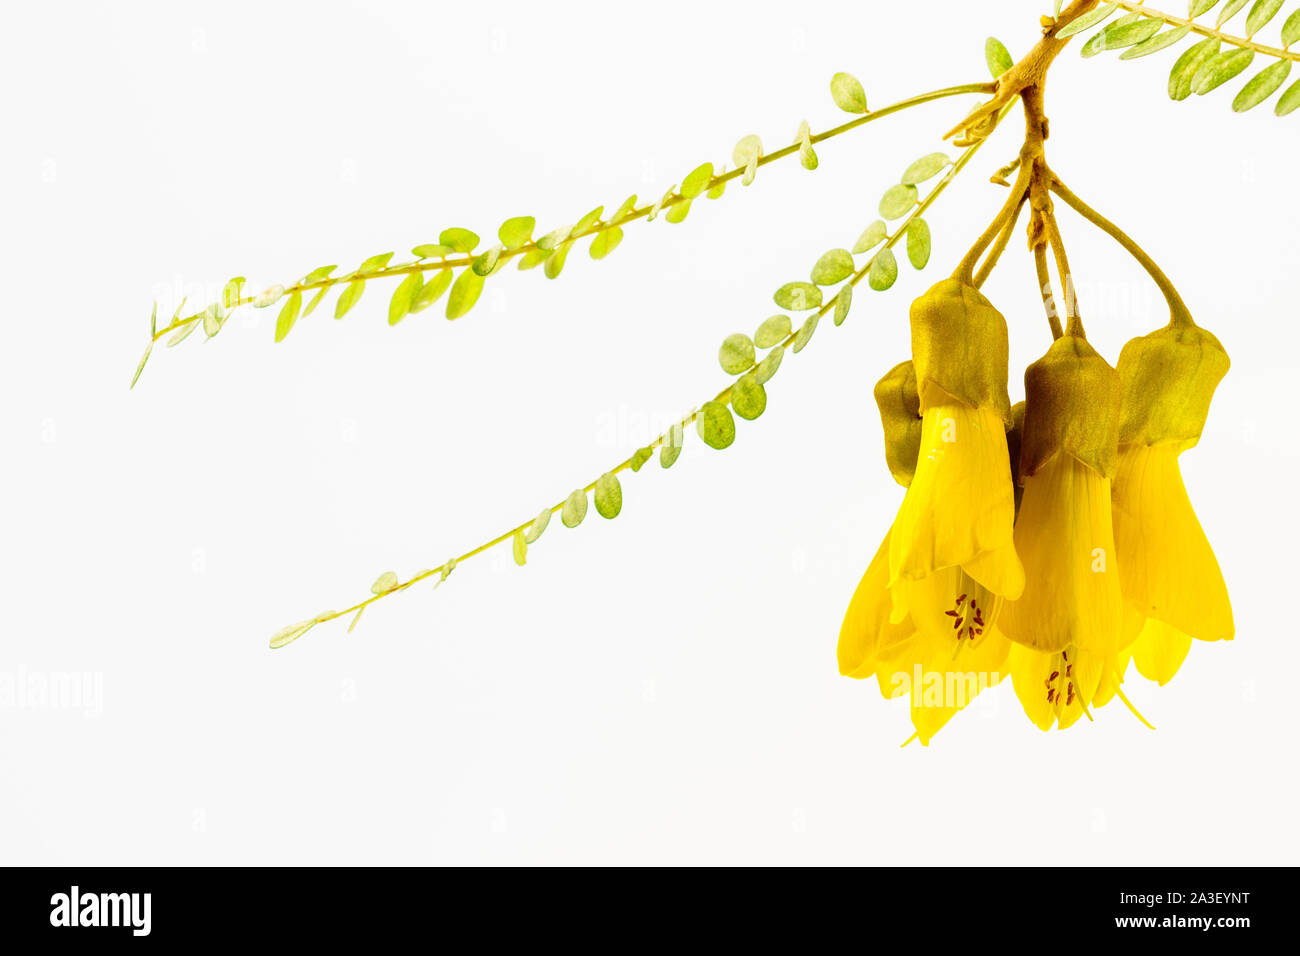 Close-up view of the spectacular yellow flowers of the New Zealand native Kowhai tree, Sophora microphylla seen isolated against a white background. Stock Photo